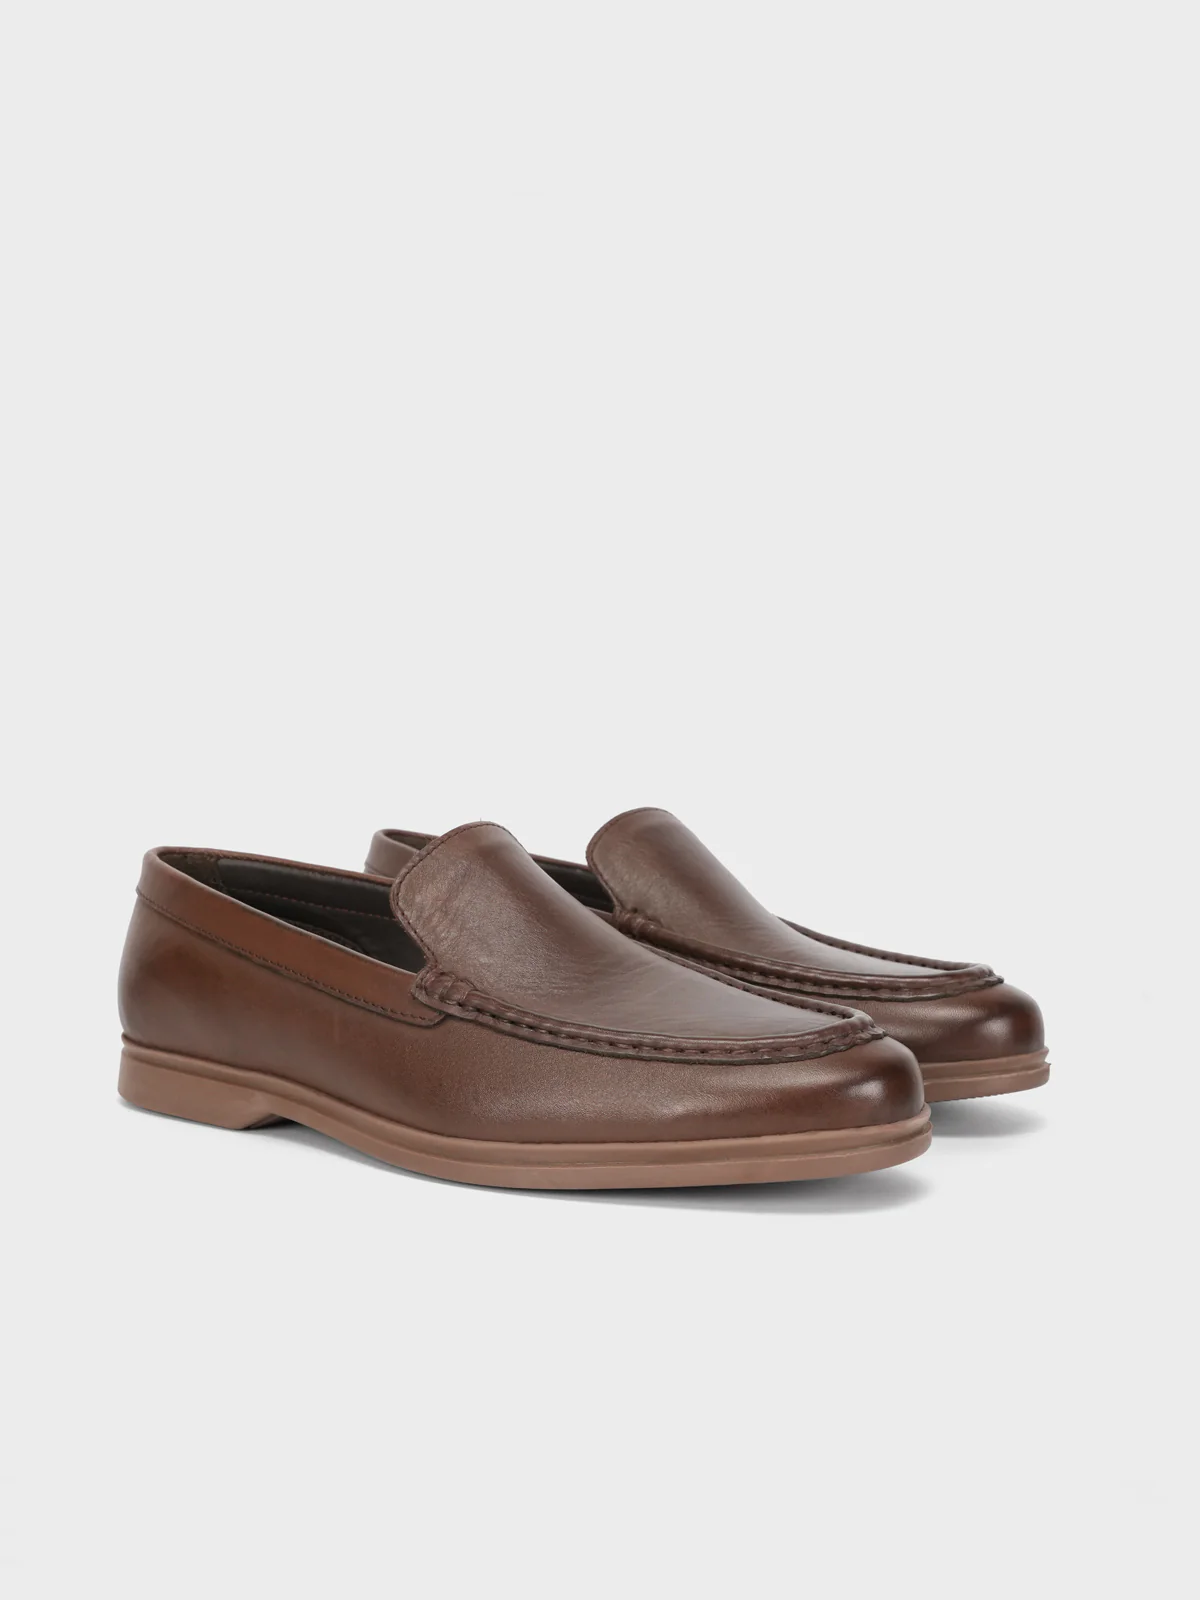 a pair of brown shoes